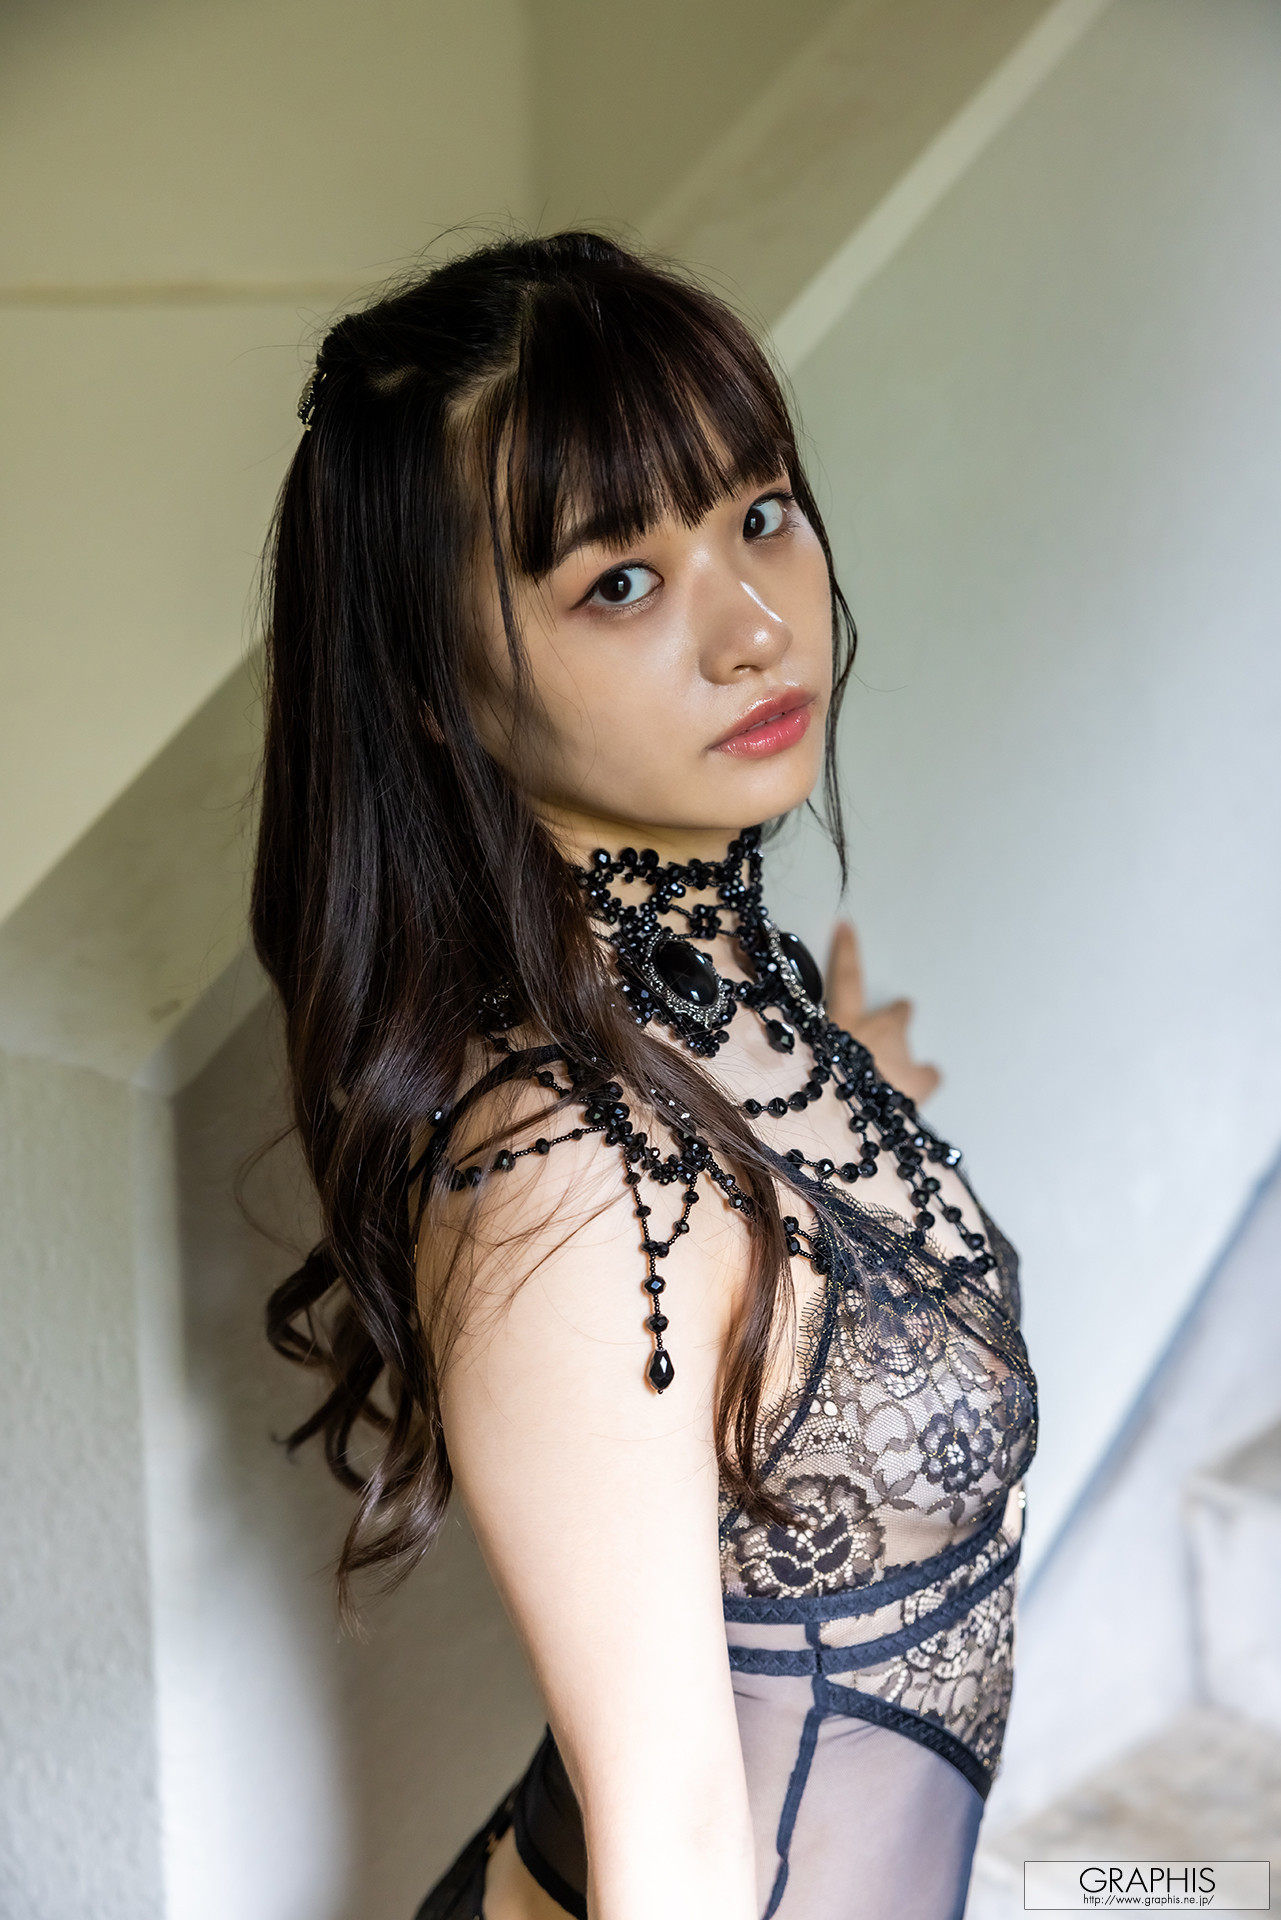 Urara Kanon 花音うらら, [Graphis] Gals 「To Be Loved」 Vol.06